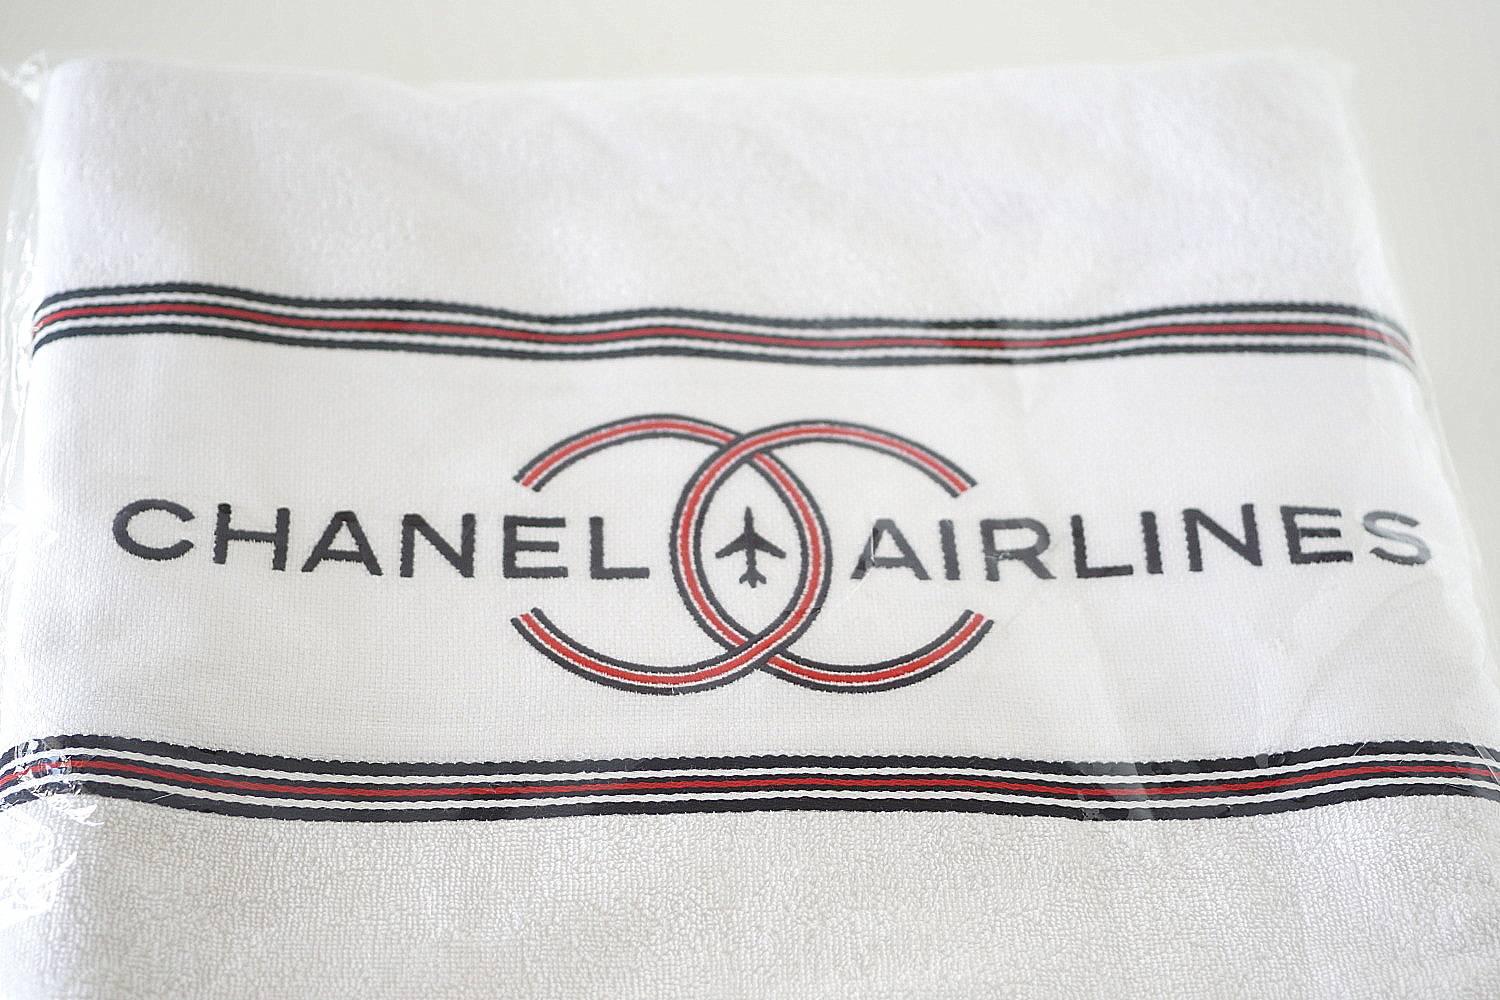 Women's or Men's Chanel Airlines Limited Edition Reversible Tote Bag with Beach Towel